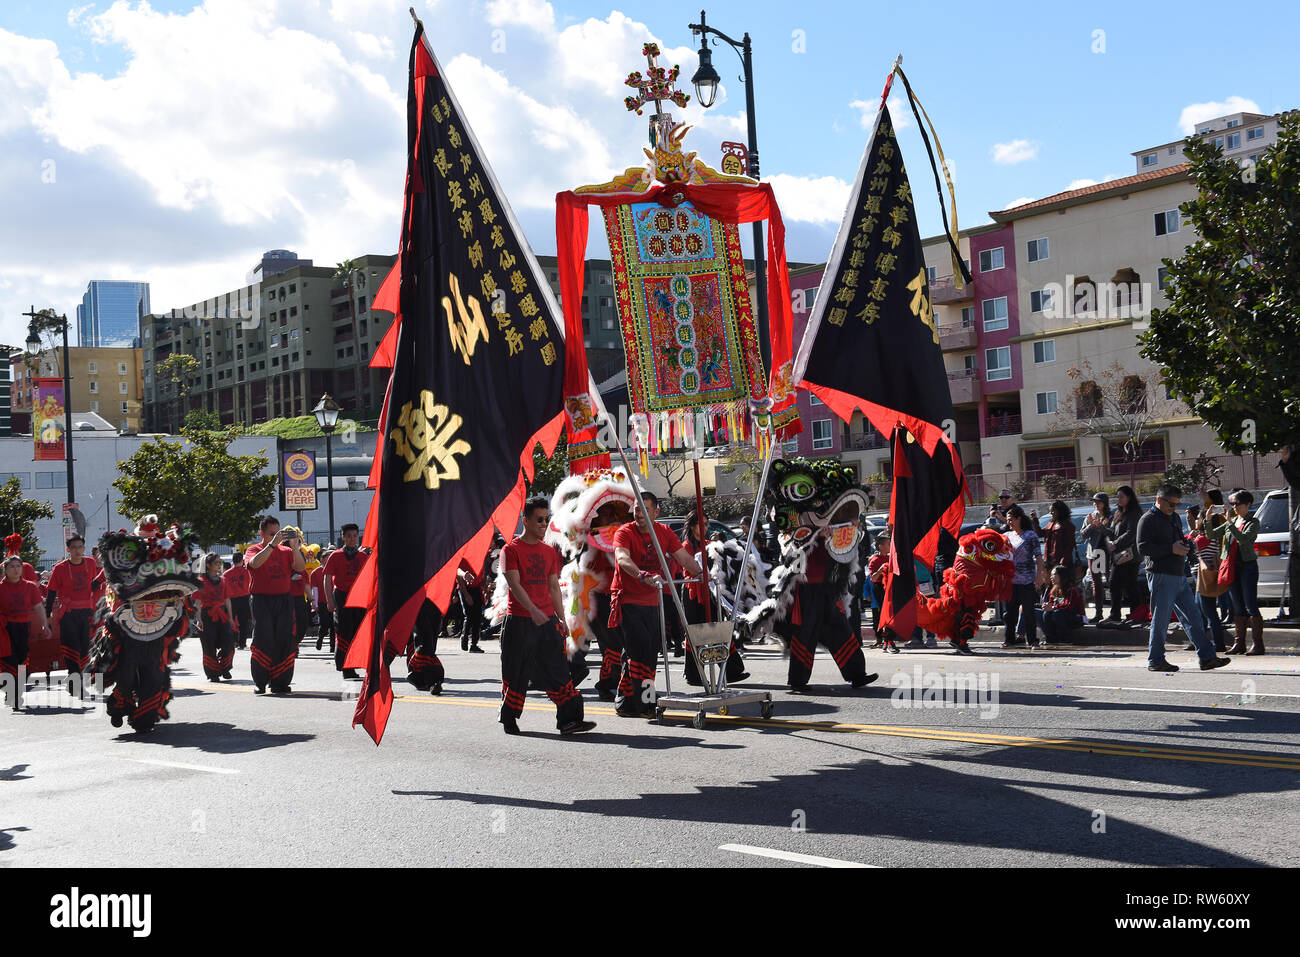 LOS ANGELES - FEBRUARY 9, 2019: Marchers in the Chinese New Year Parade in Chinatown, Los Angels. Stock Photo